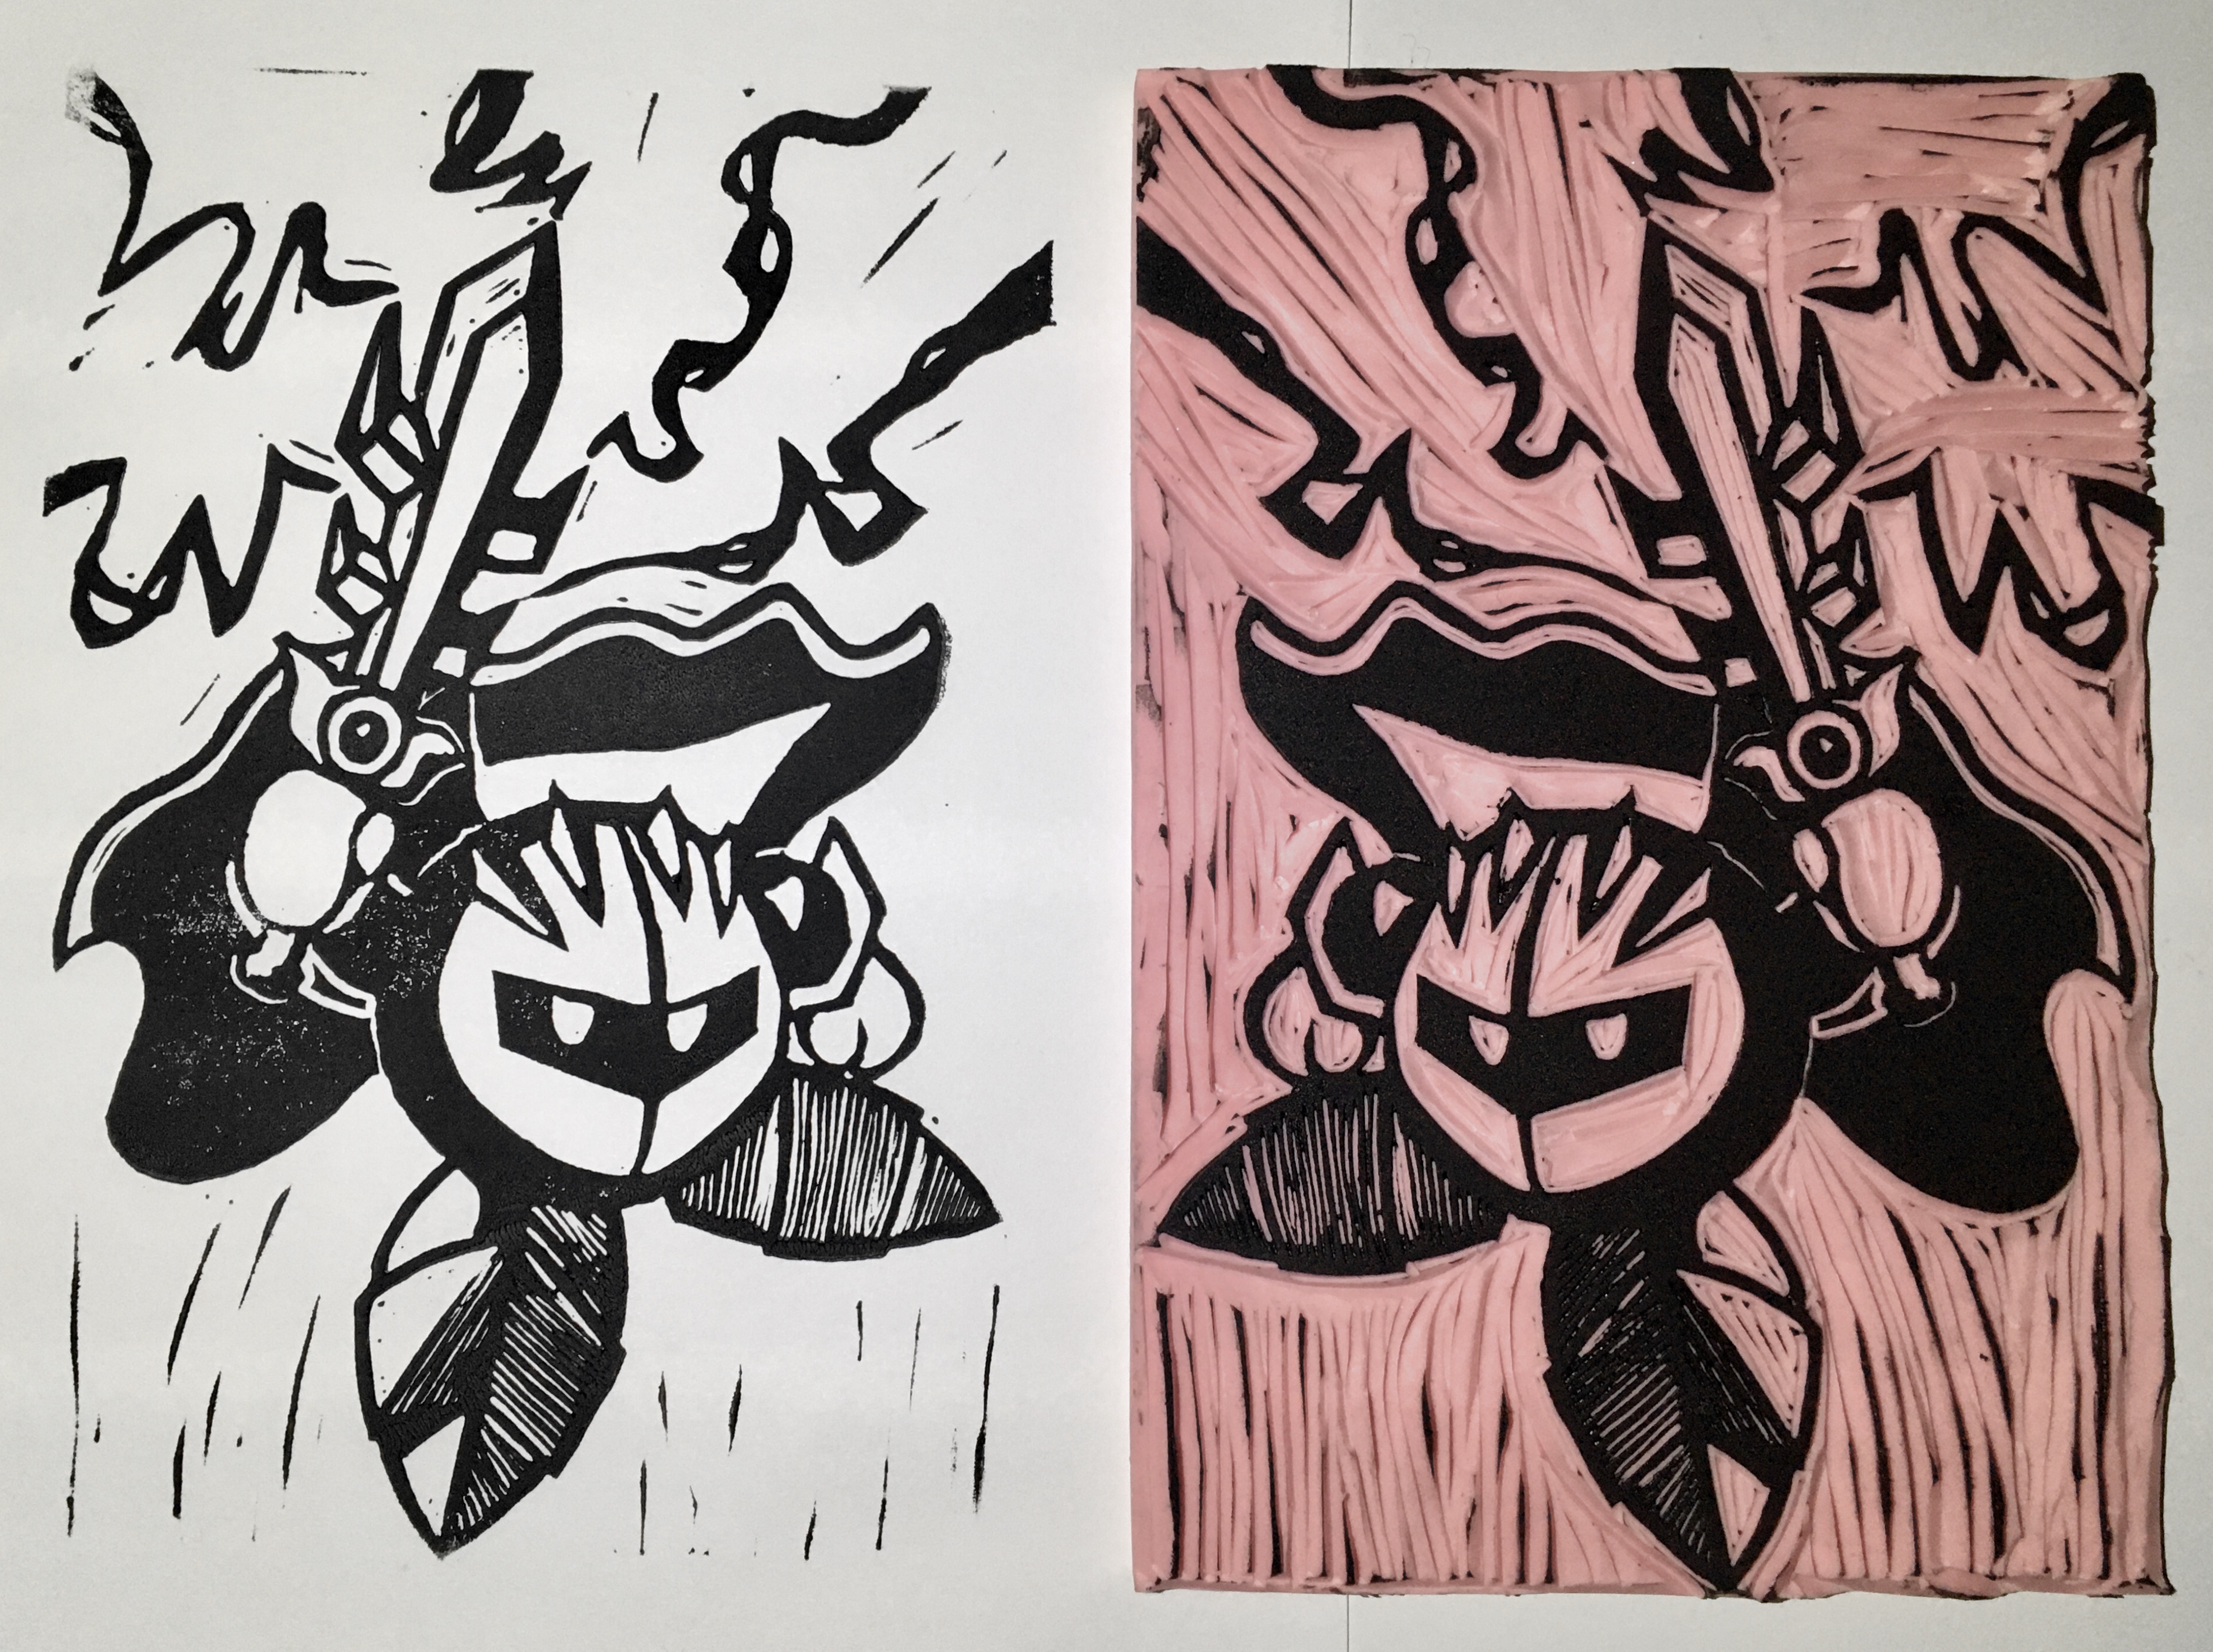 black ink blockprint on white paper depicting meta knight. he raises his sword determinedly as his cape billows behind him. bolts of lightning reach down to touch the five points on his sword. to the left, a pink rubber block is carved with the same design, flipped horizontally